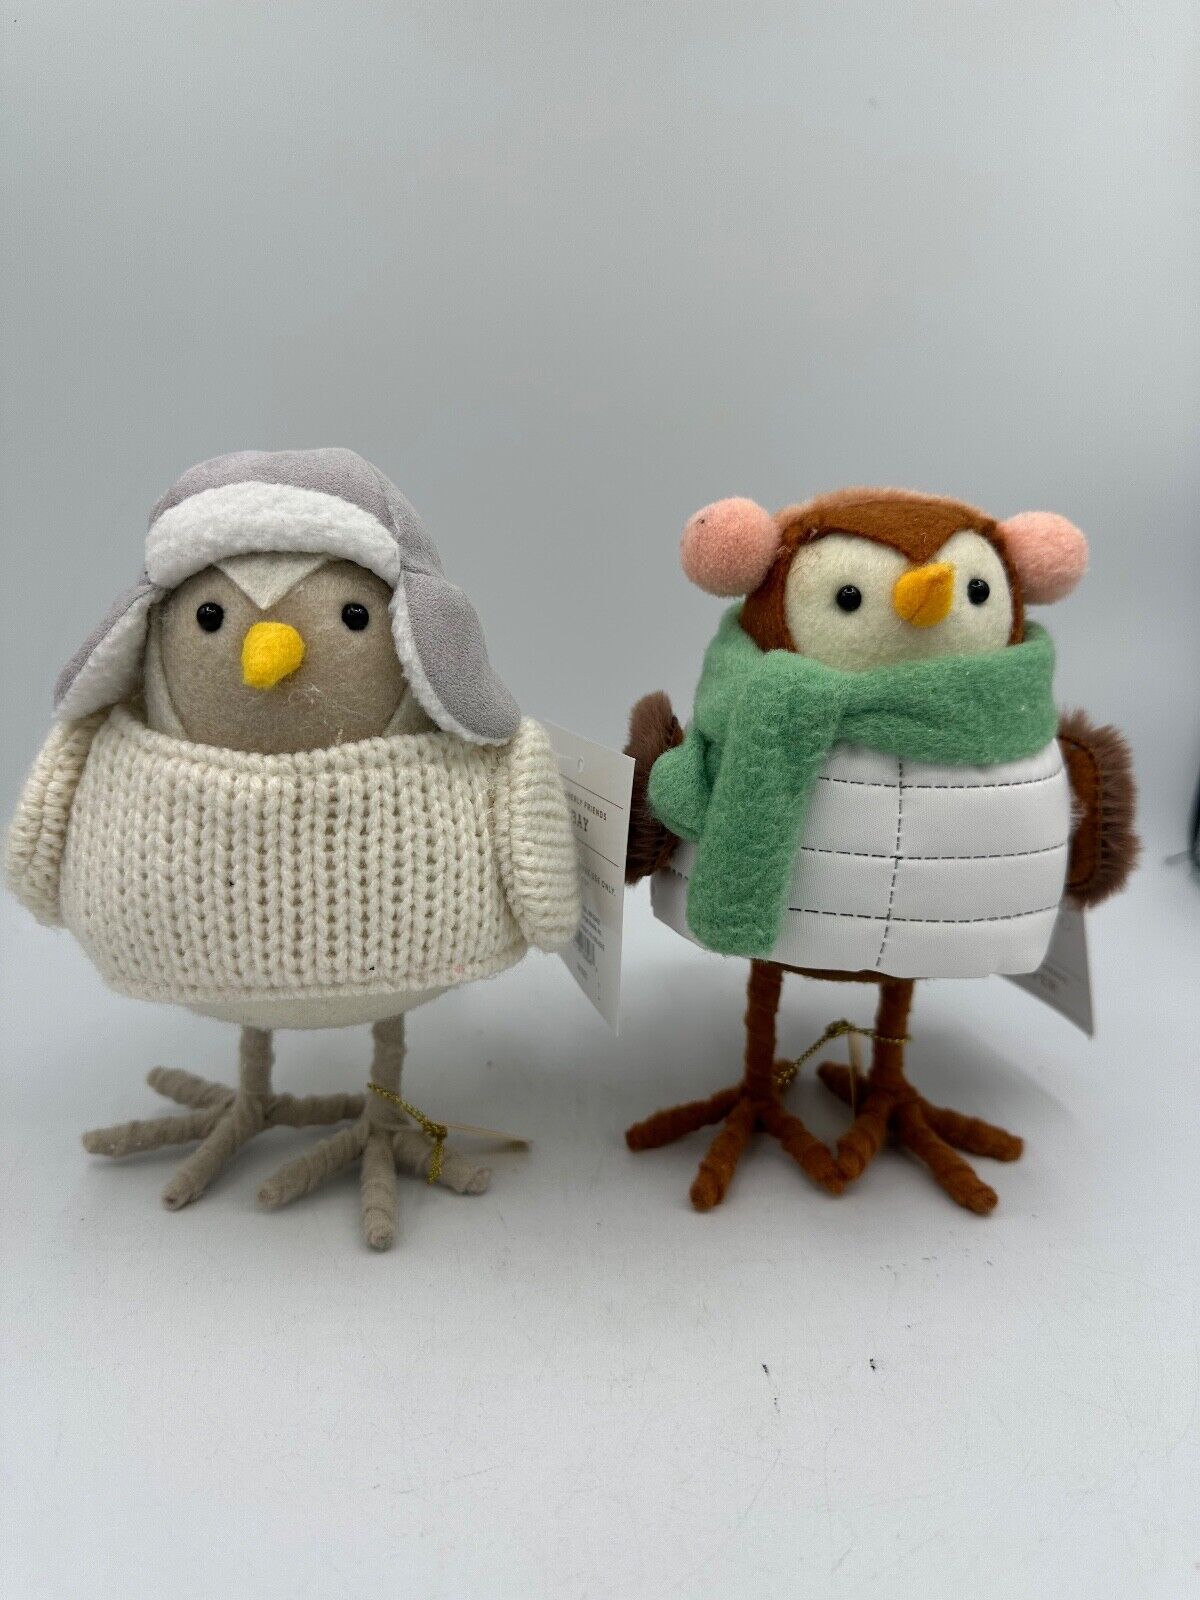 2023 Target Wondershop Winter Cold Holiday Bay Wafer Featherly Friend 2 Birds